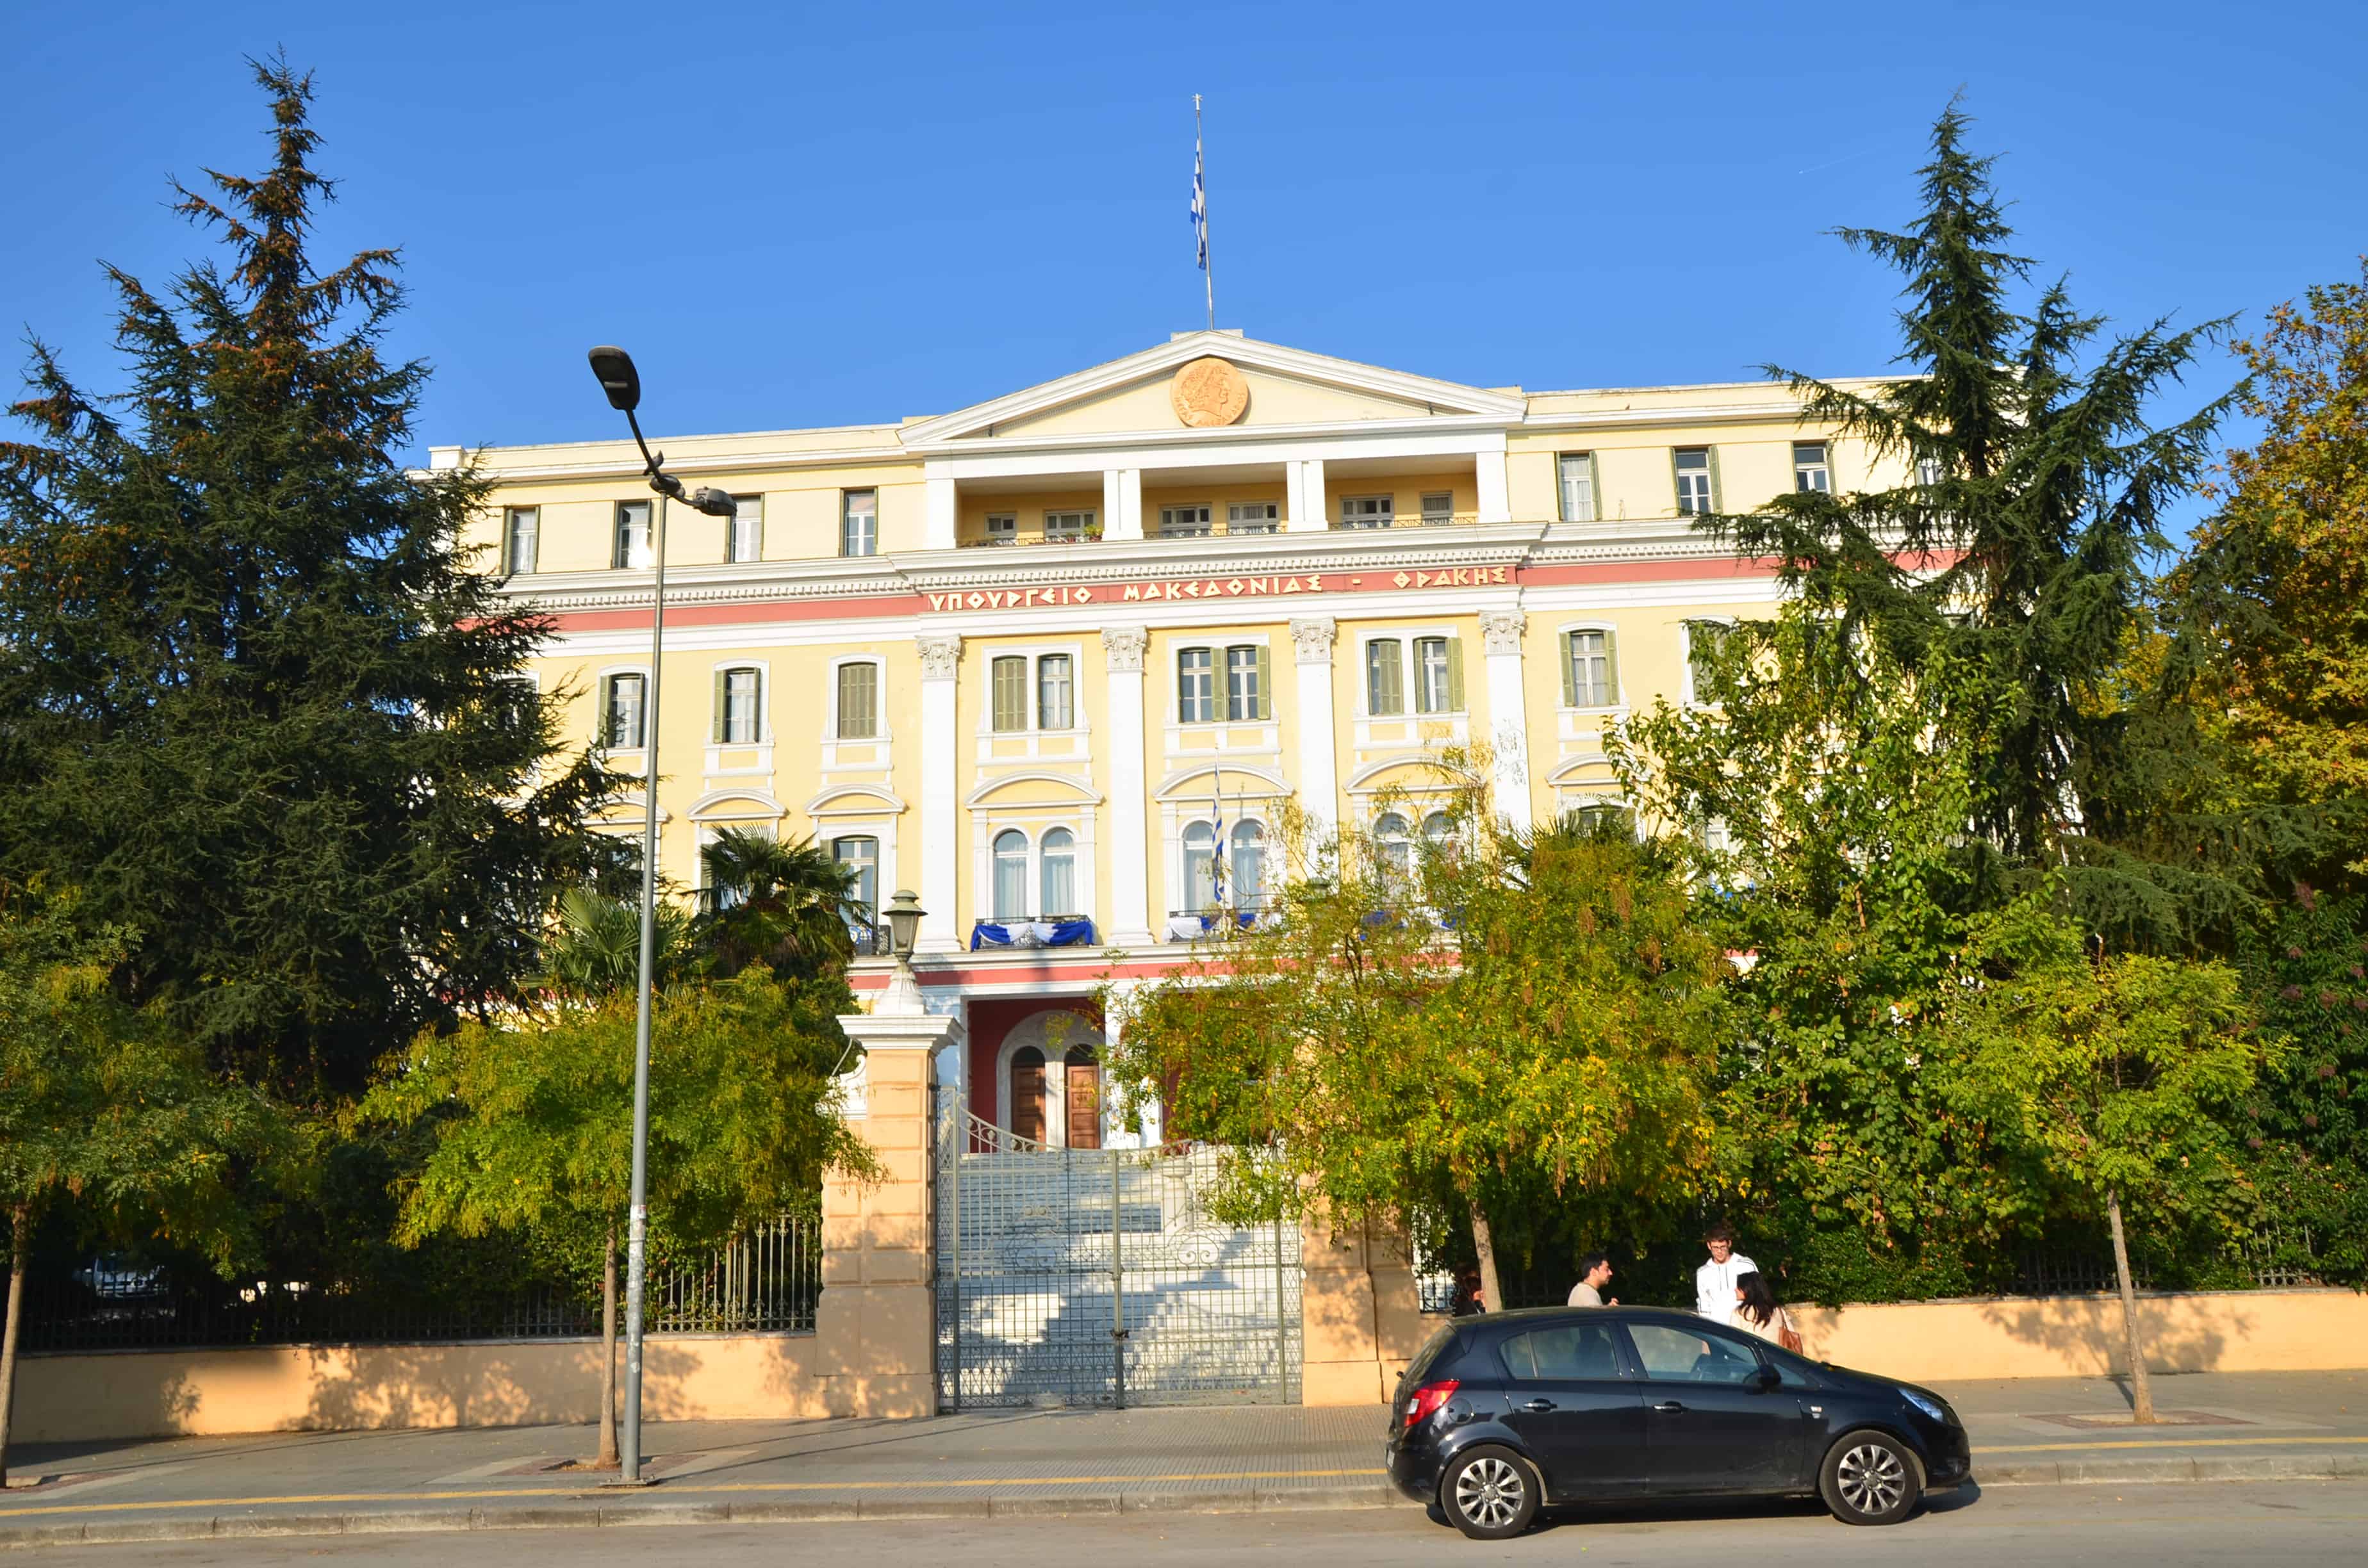 Government House in Thessaloniki, Greece